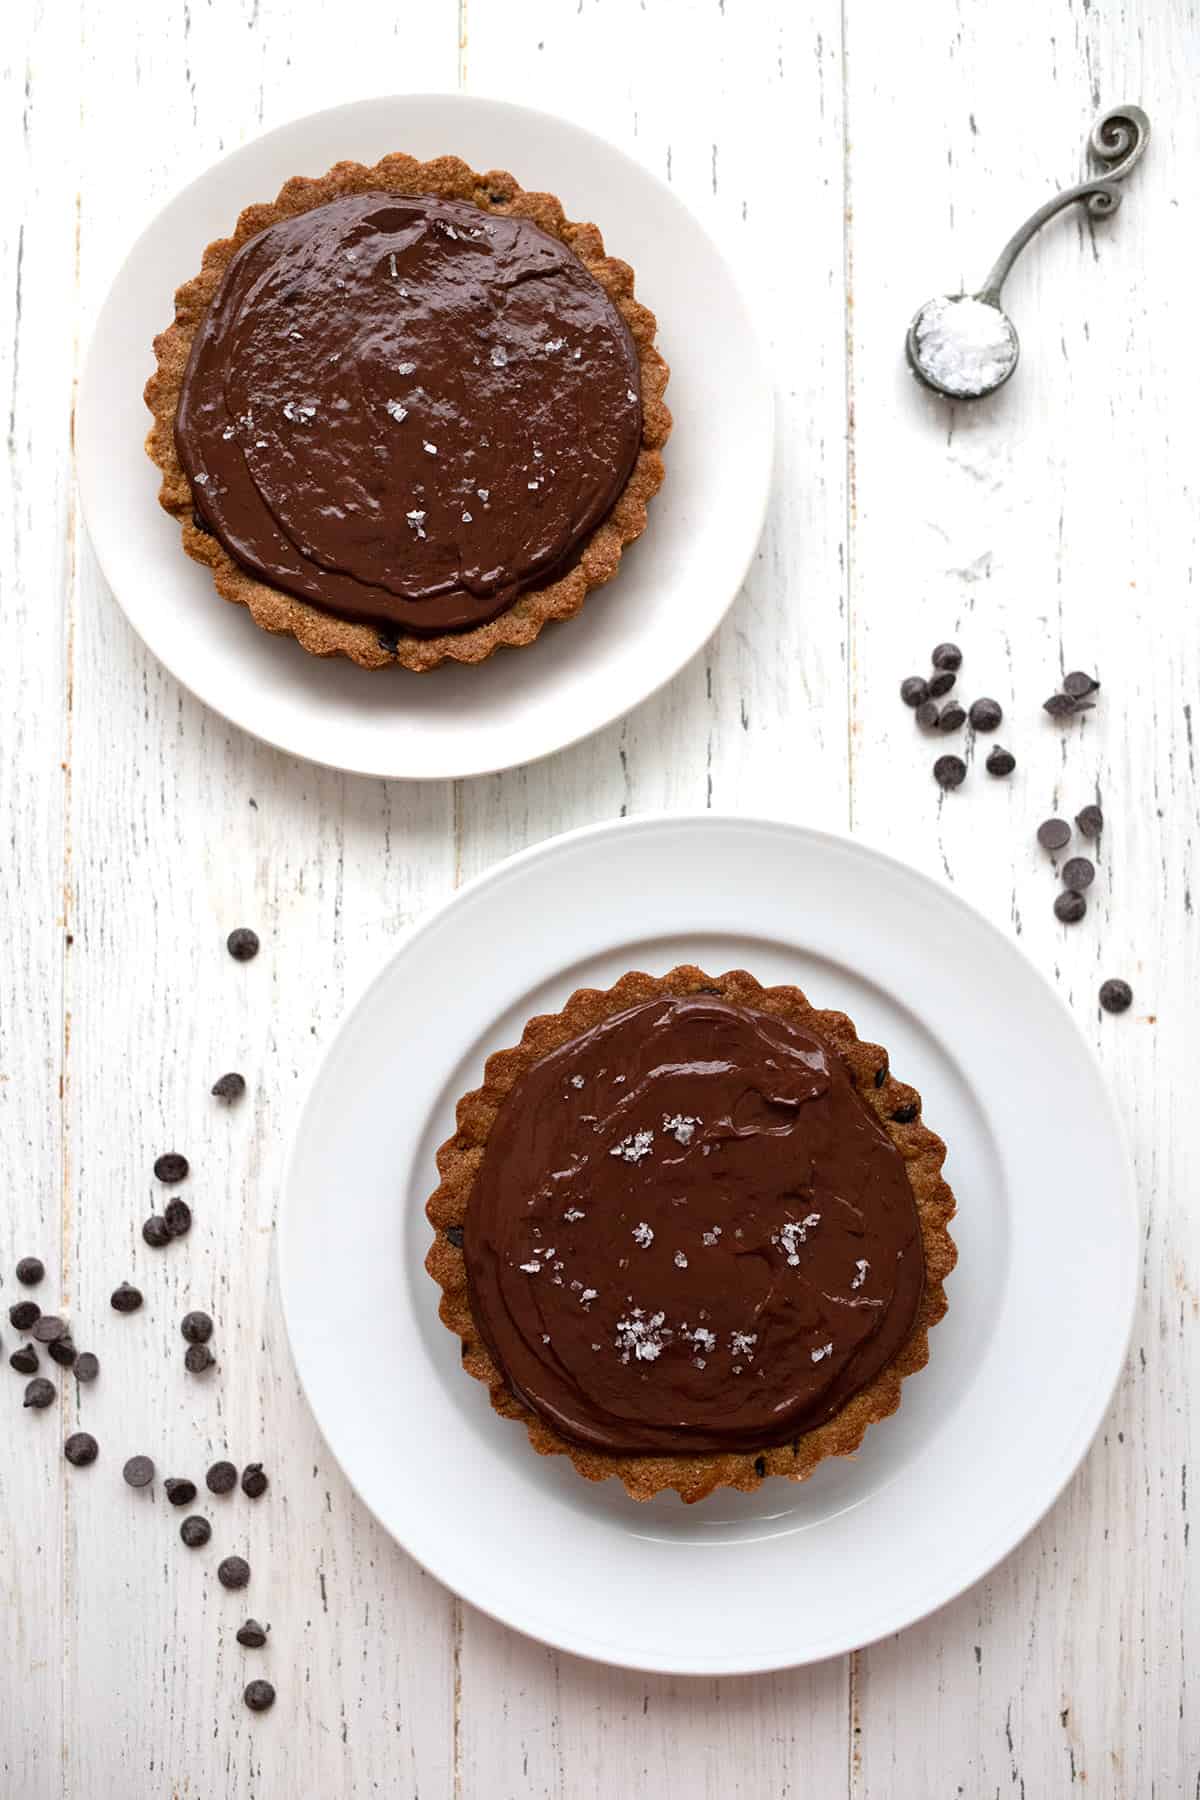 Top down image of two keto caramel tarts with chocolate ganache.